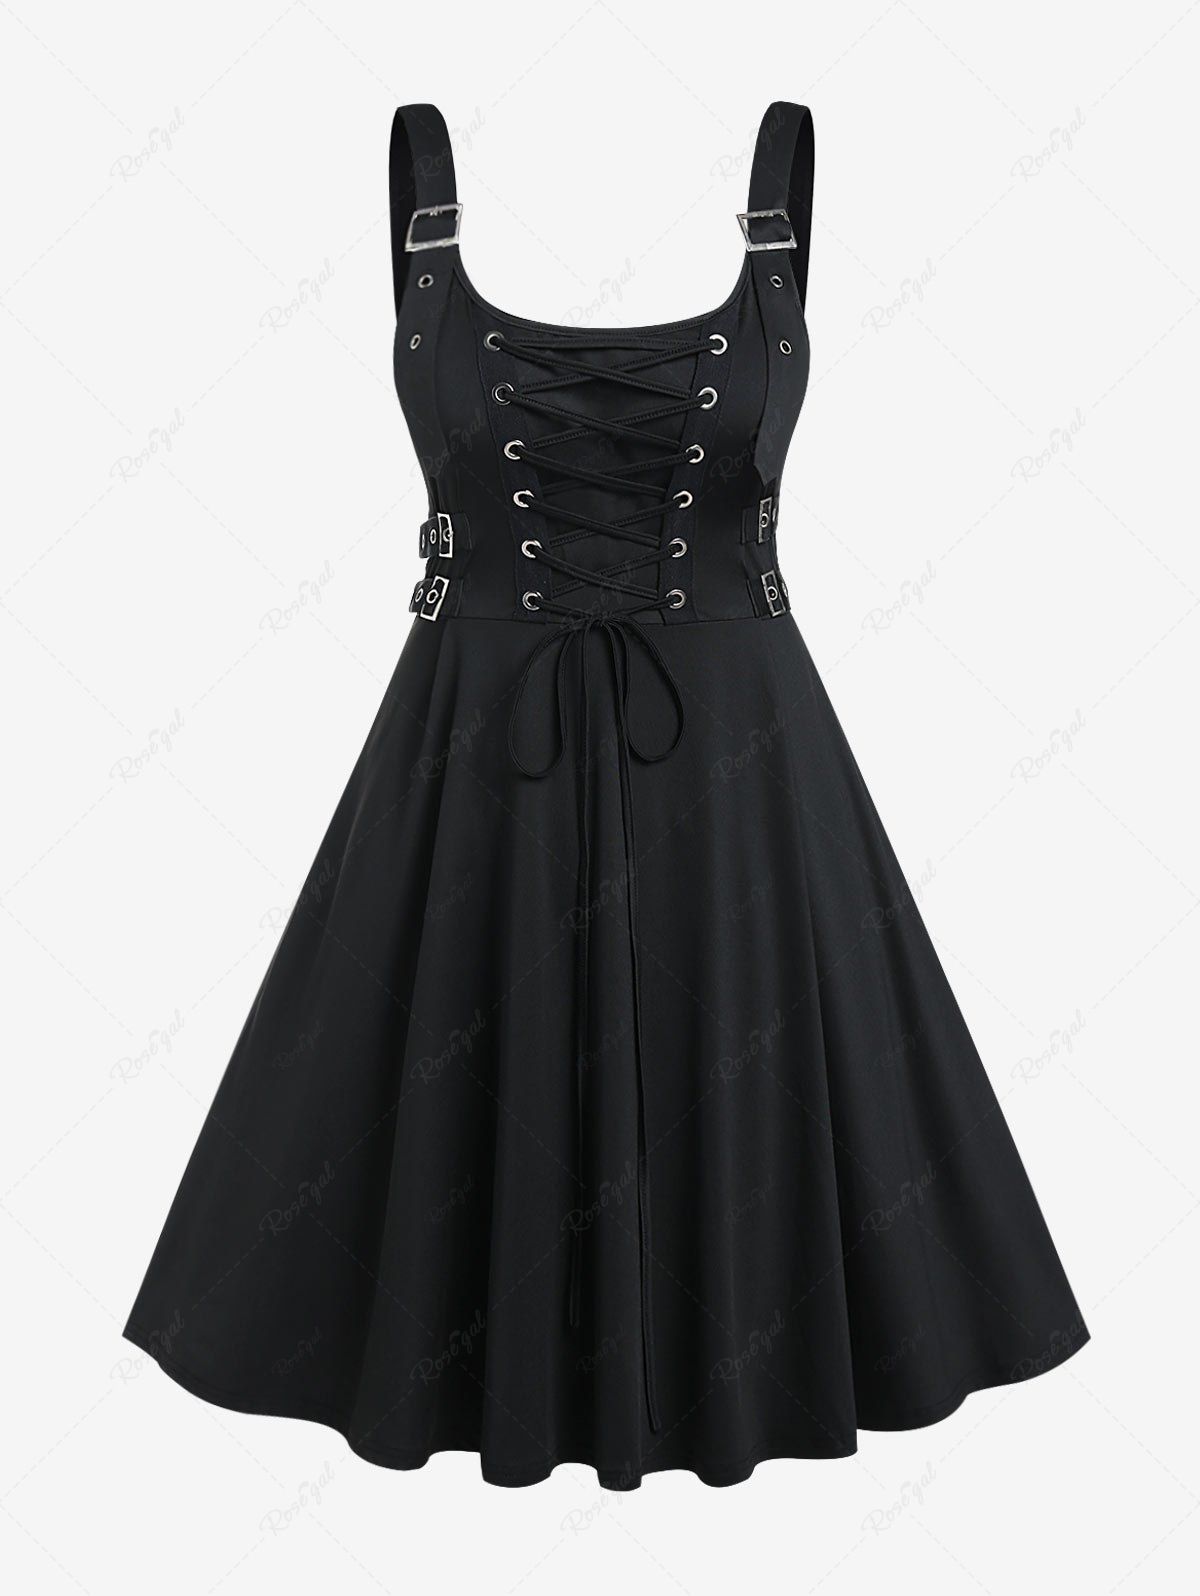 New Plus Size Lace Up Buckles A Line Sleeveless Gothic Dress  